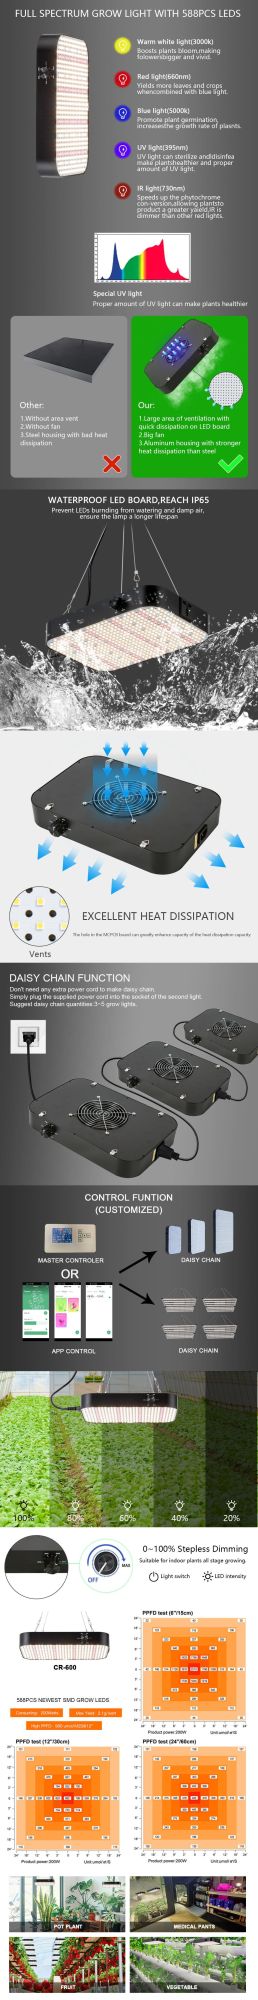 200 Watt Dimmable LED Hanging Plant Grow Lights for Indoor Plants Full Spectrum, Seedling Vegetables Flower Growing Lamps, 588PCS LEDs & Daisy Chain Function